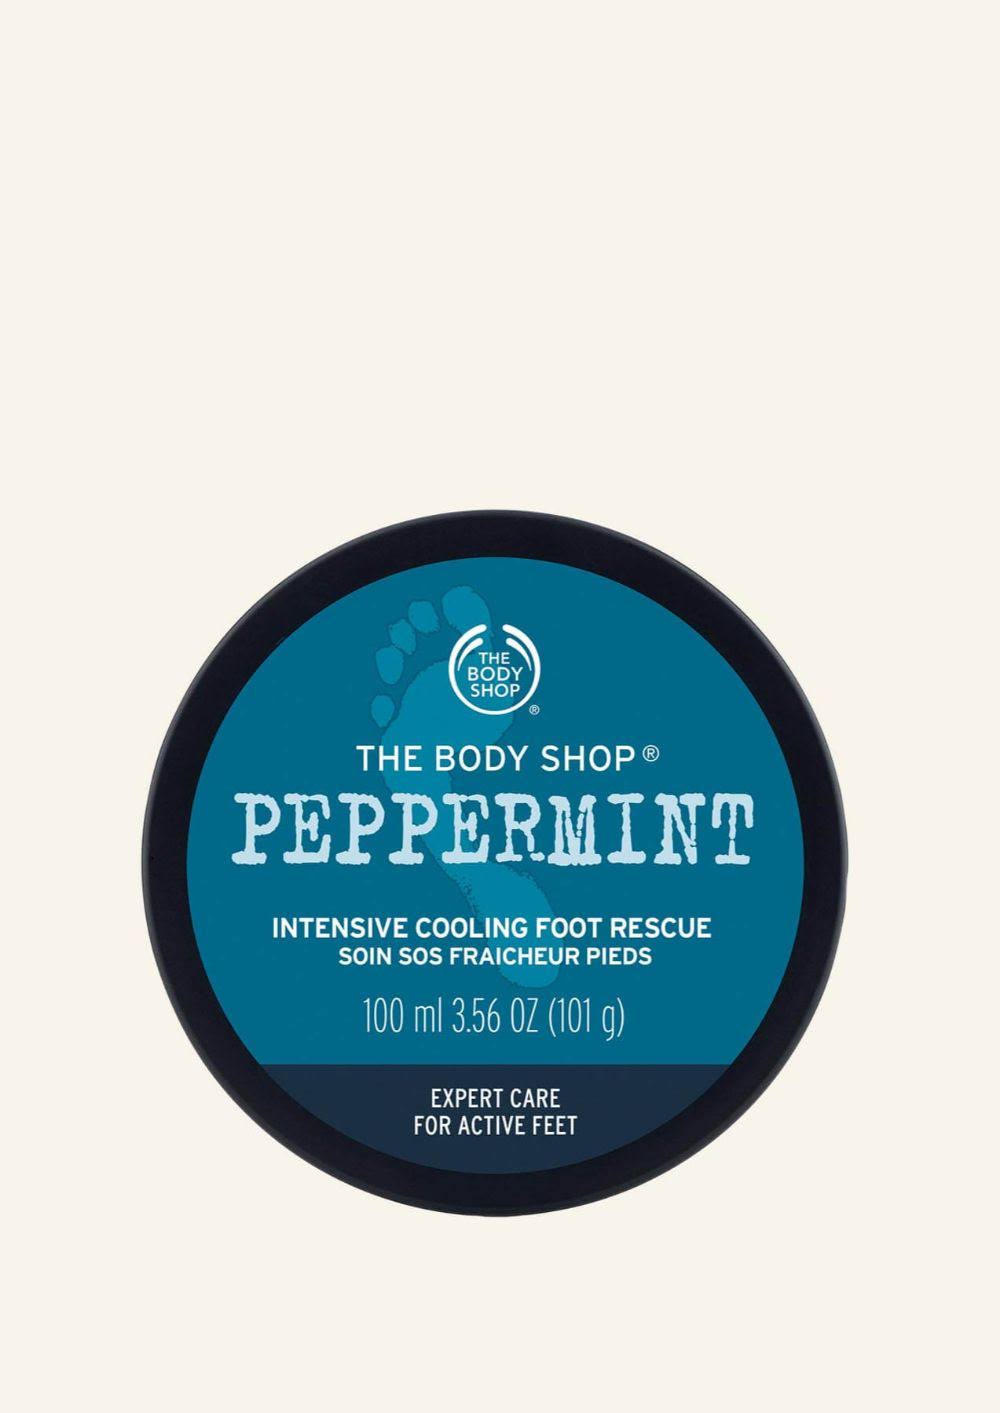 The Body Shop Peppermint Intensive Cooling Foot Rescue 100 ml